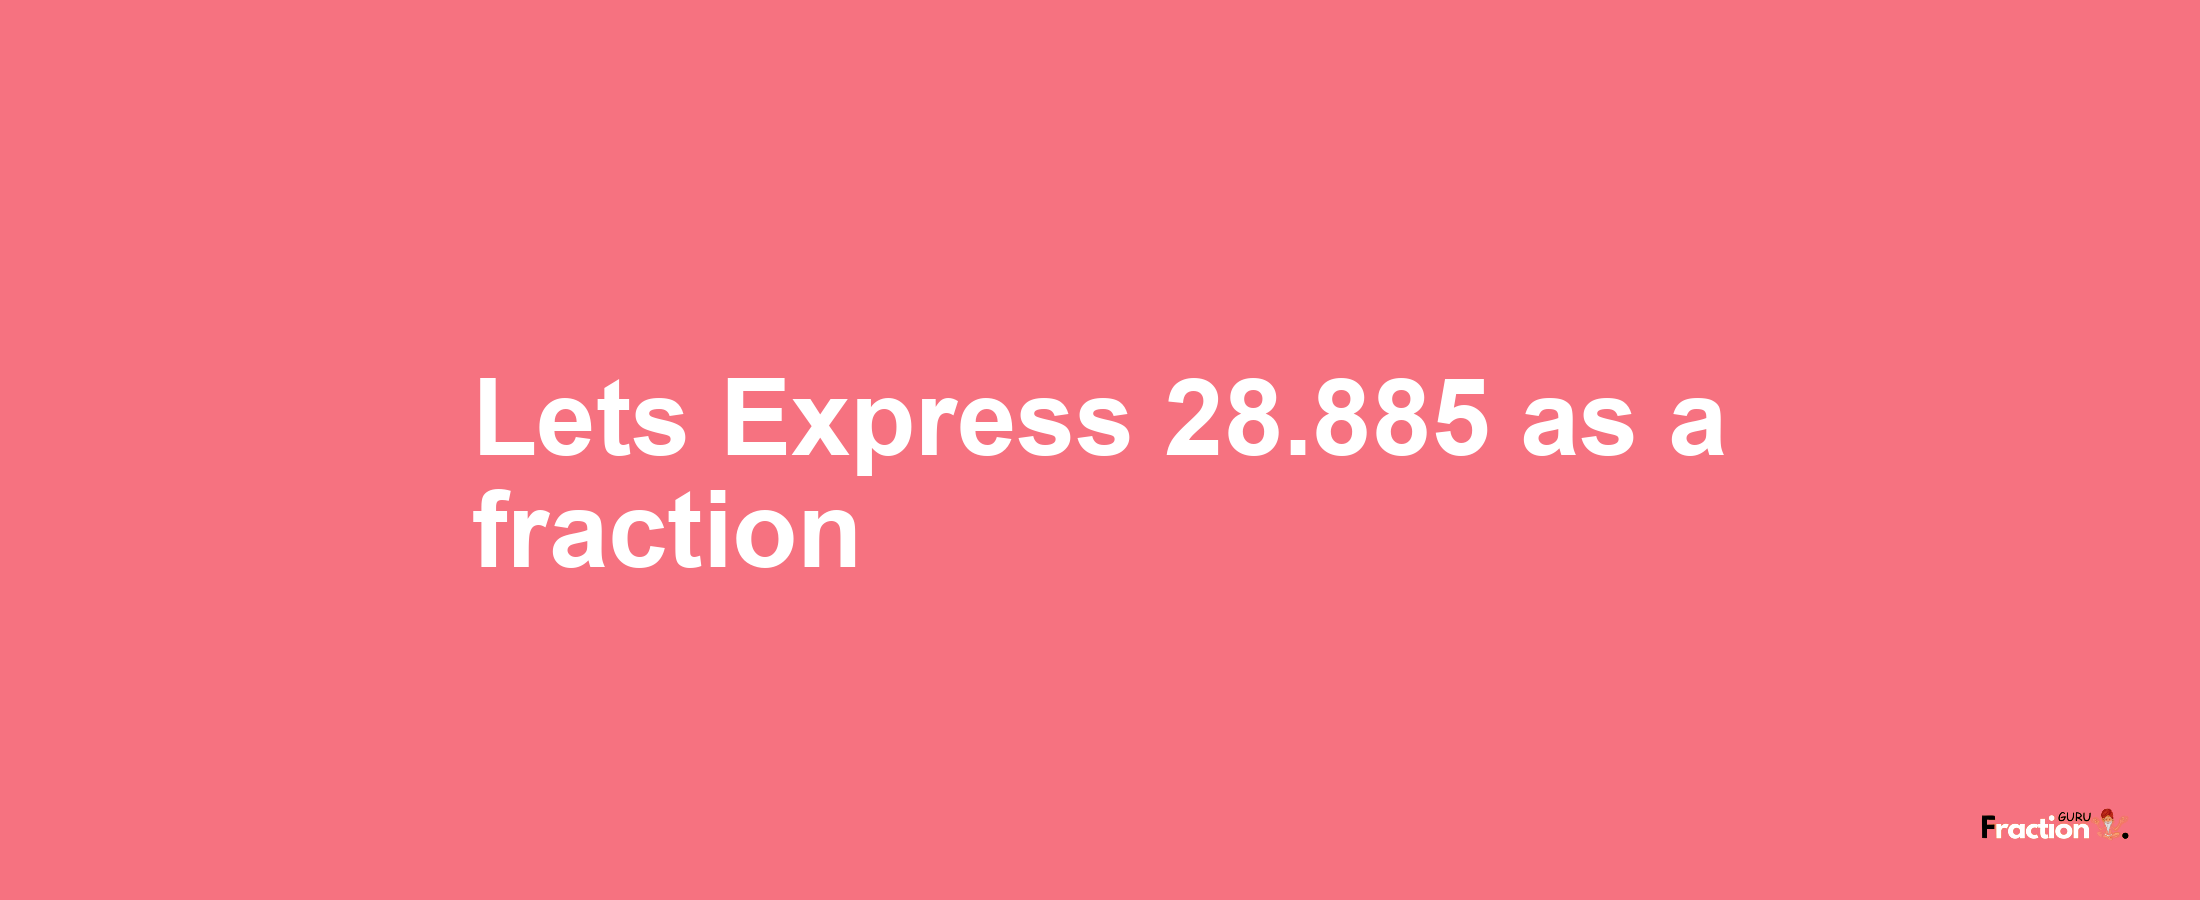 Lets Express 28.885 as afraction